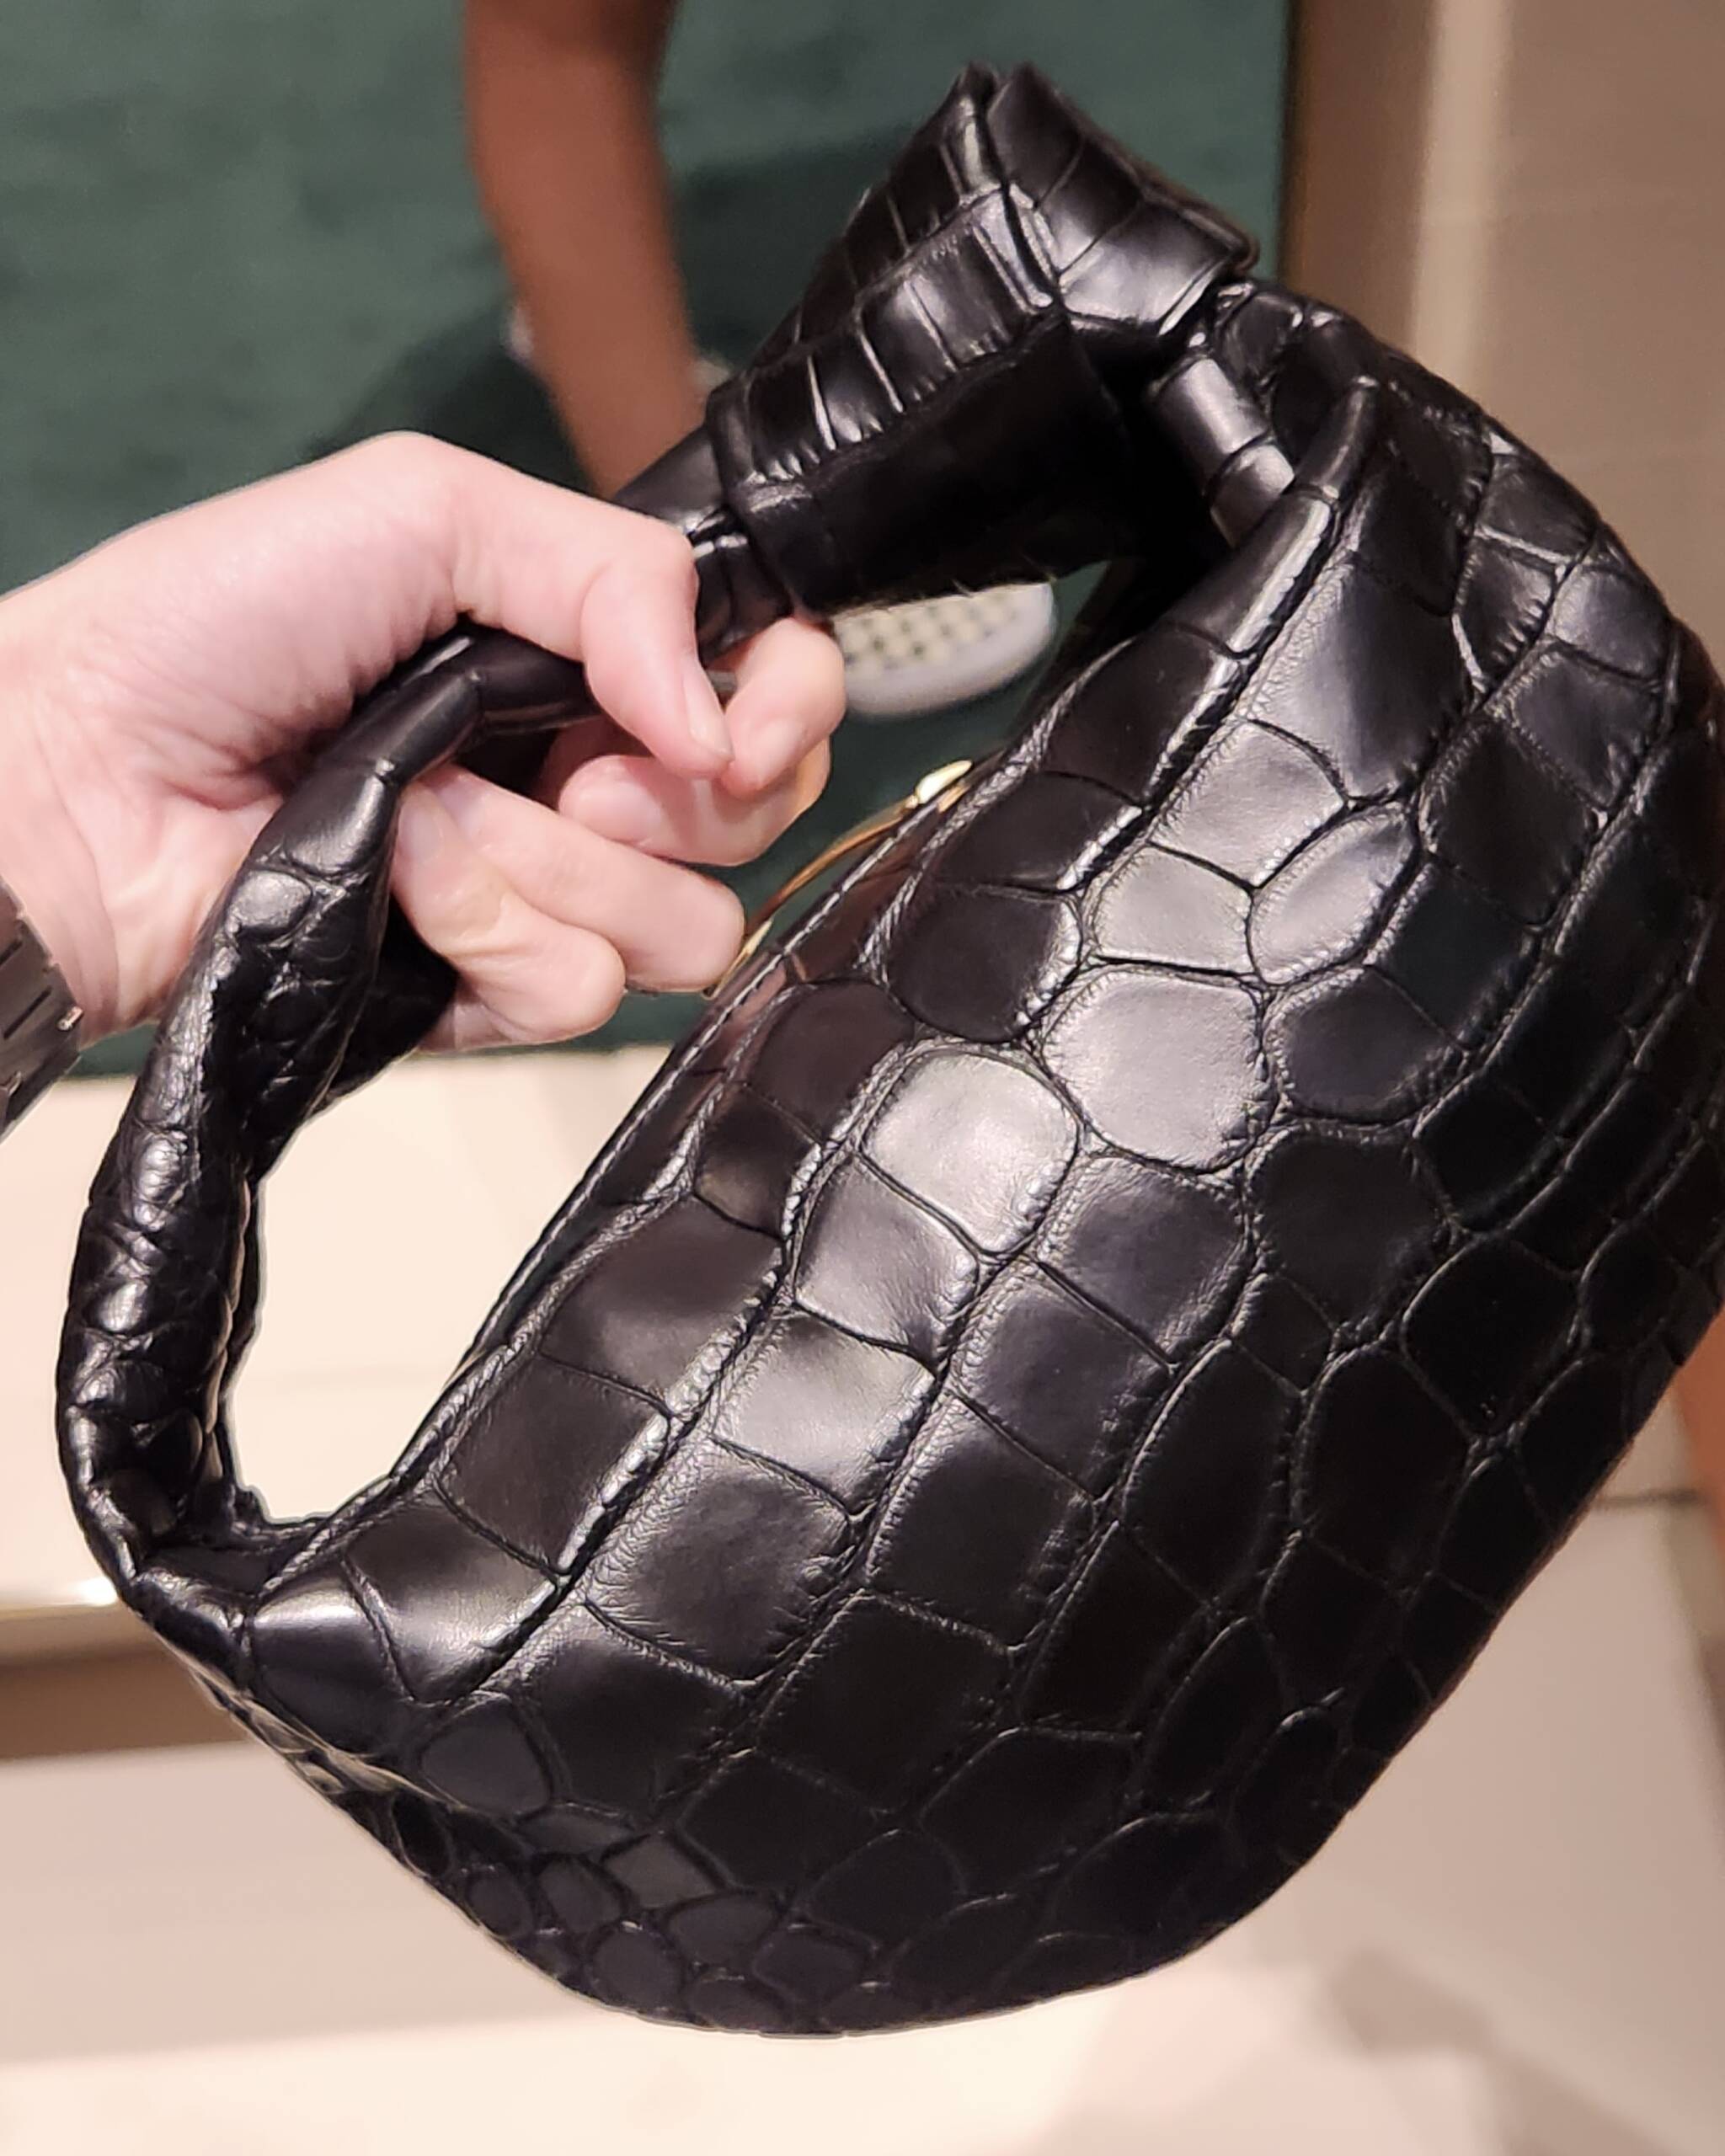 Bottega Veneta Introduces Teen Size Pouch and Jodie Bags